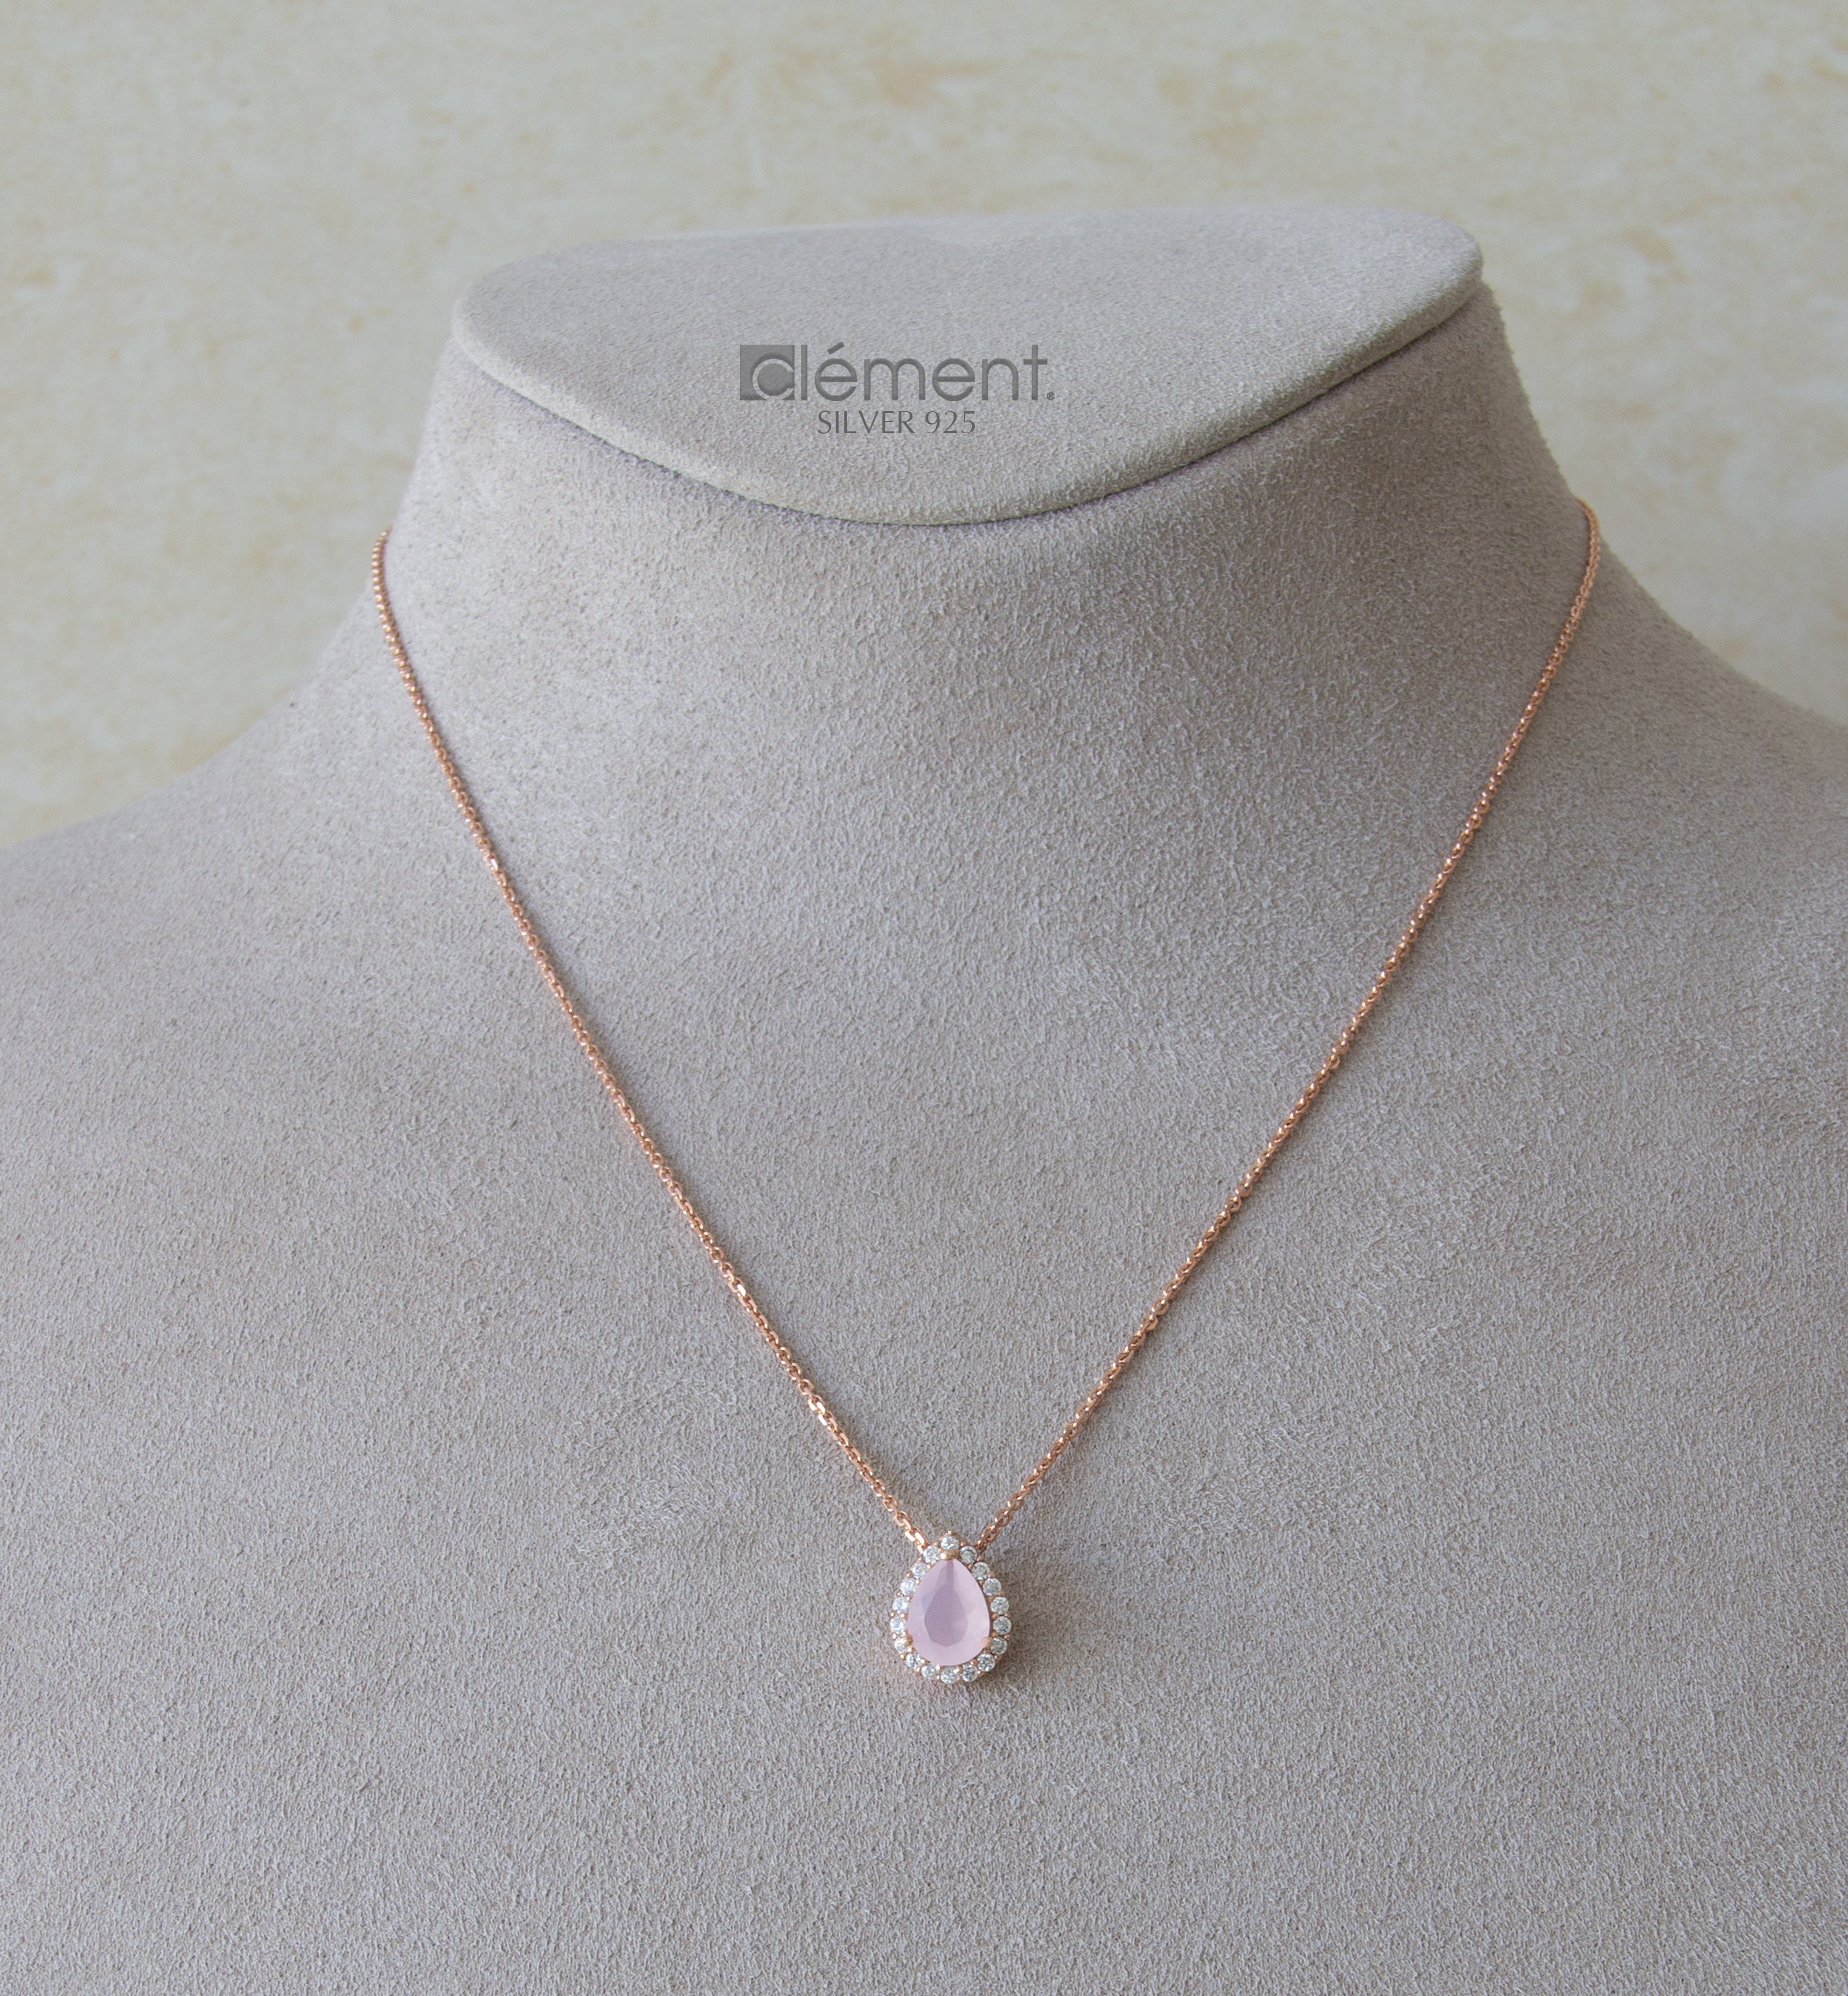 Silver 925 Rose Gold Plated Drop Pendant Necklace